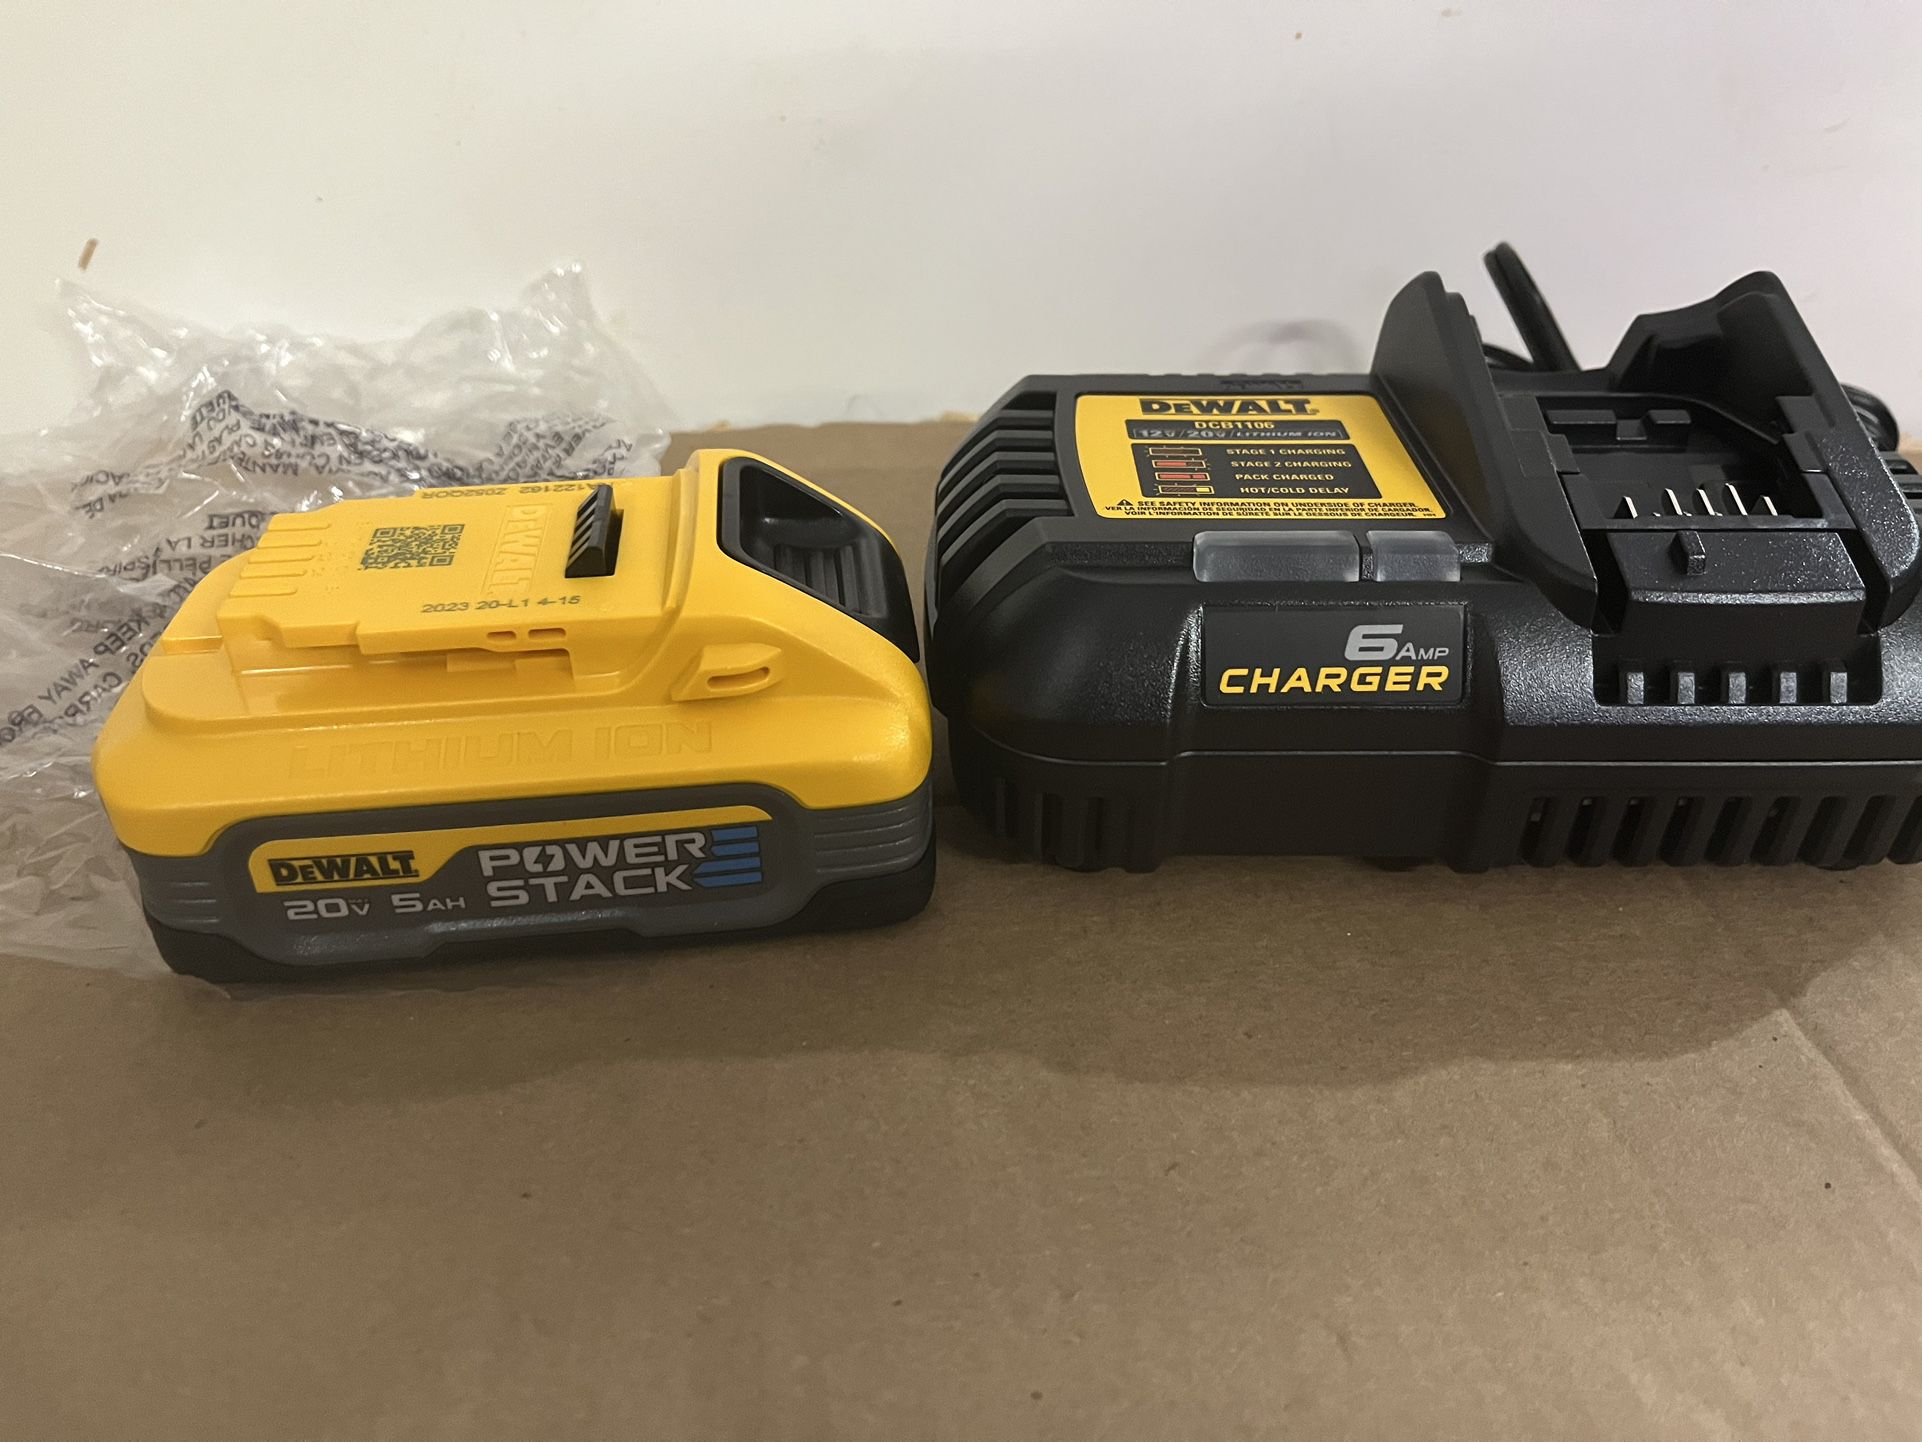 DEWALT POWERSTACK 20V Lithium-Ion 5.0Ah Battery Pack and Charger